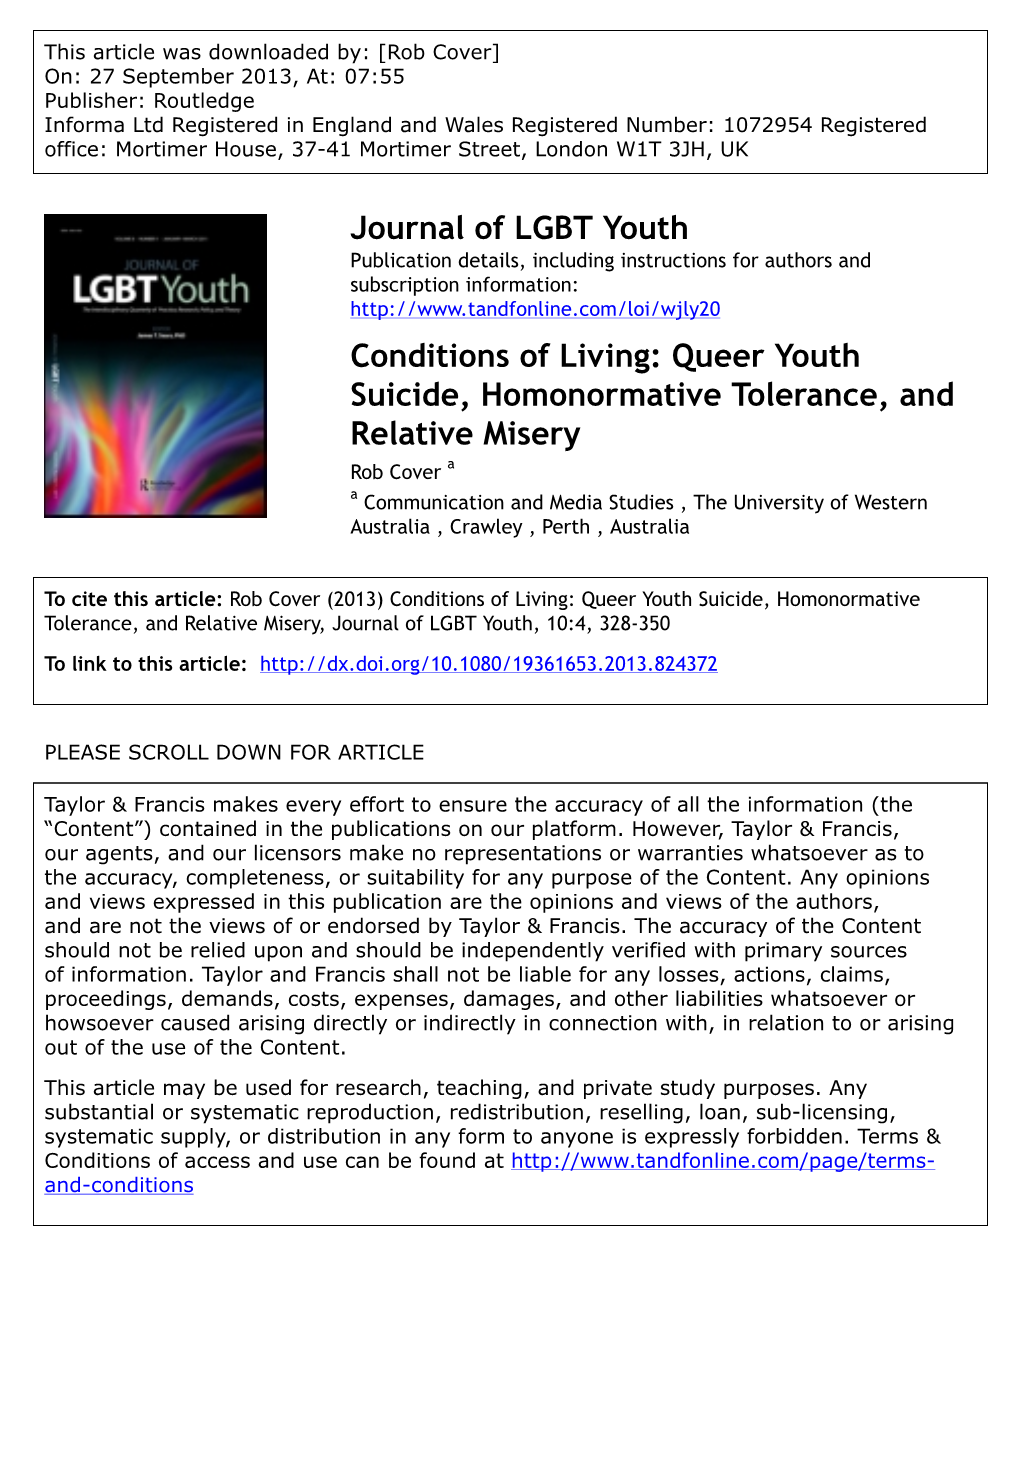 Journal of LGBT Youth Conditions of Living: Queer Youth Suicide